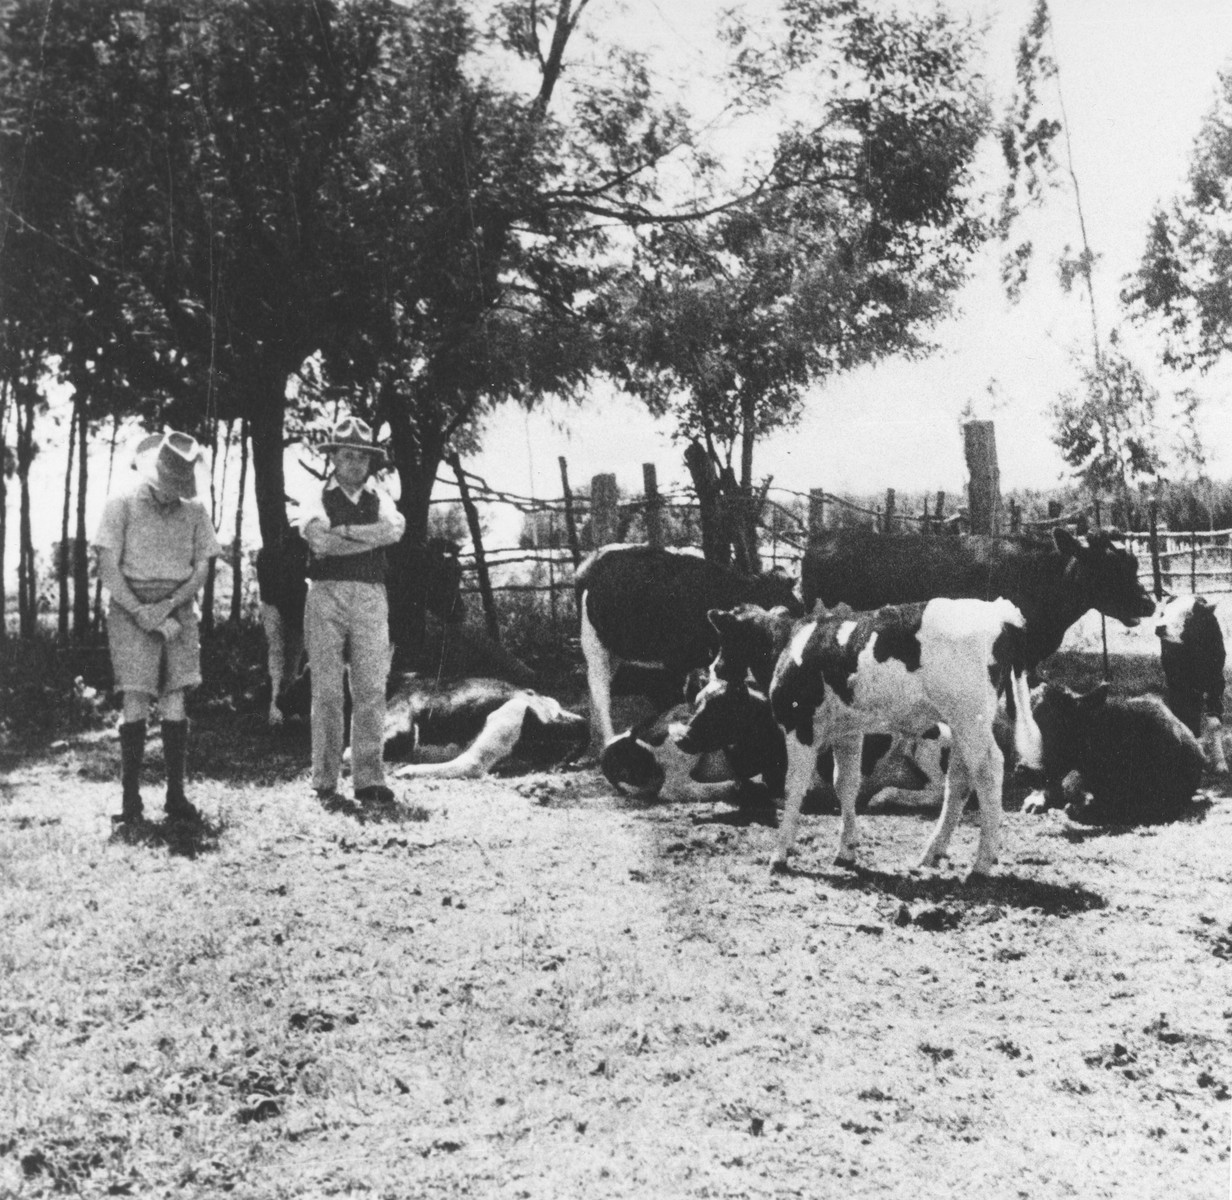 Two Jewish refugees from Germany stand among their dairy cows on their farm near Limuru, Kenya (Kiambu district), where they found refuge during World War II.

Pictured are George and Joseph Berg.